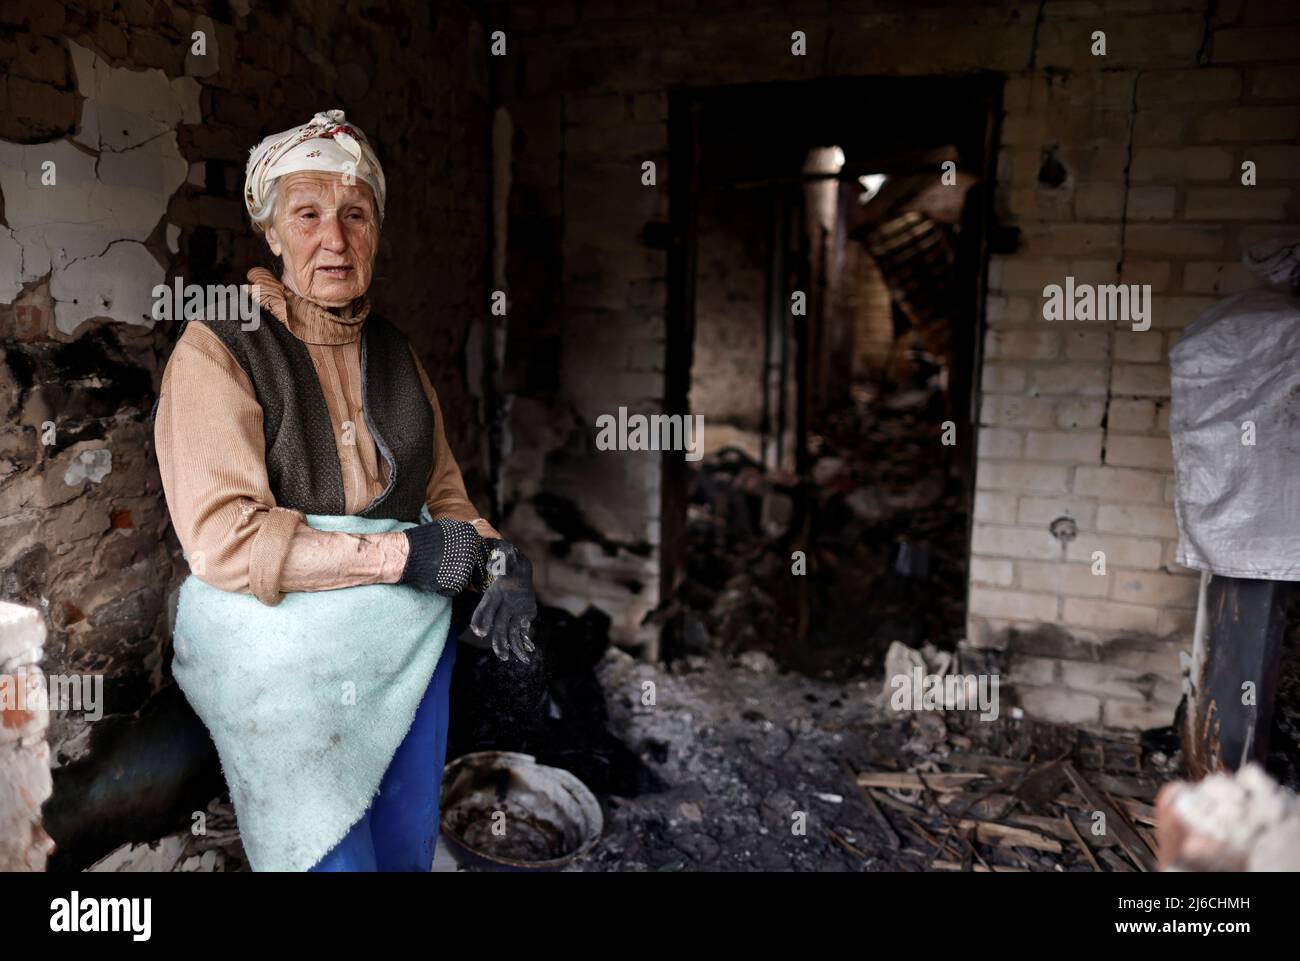 Hanna Selivon, 77, stands at her house, which according to her was destroyed by Russian shelling, amid their invasion of Ukraine, on the outskirts of Chernihiv, Ukraine April 30, 2022. Selivon said she now lives at the volunteer center in downtown Chernihiv and bikes everyday to her home to try to recover what remains of her belongings. REUTERS/Zohra Bensemra Stock Photo